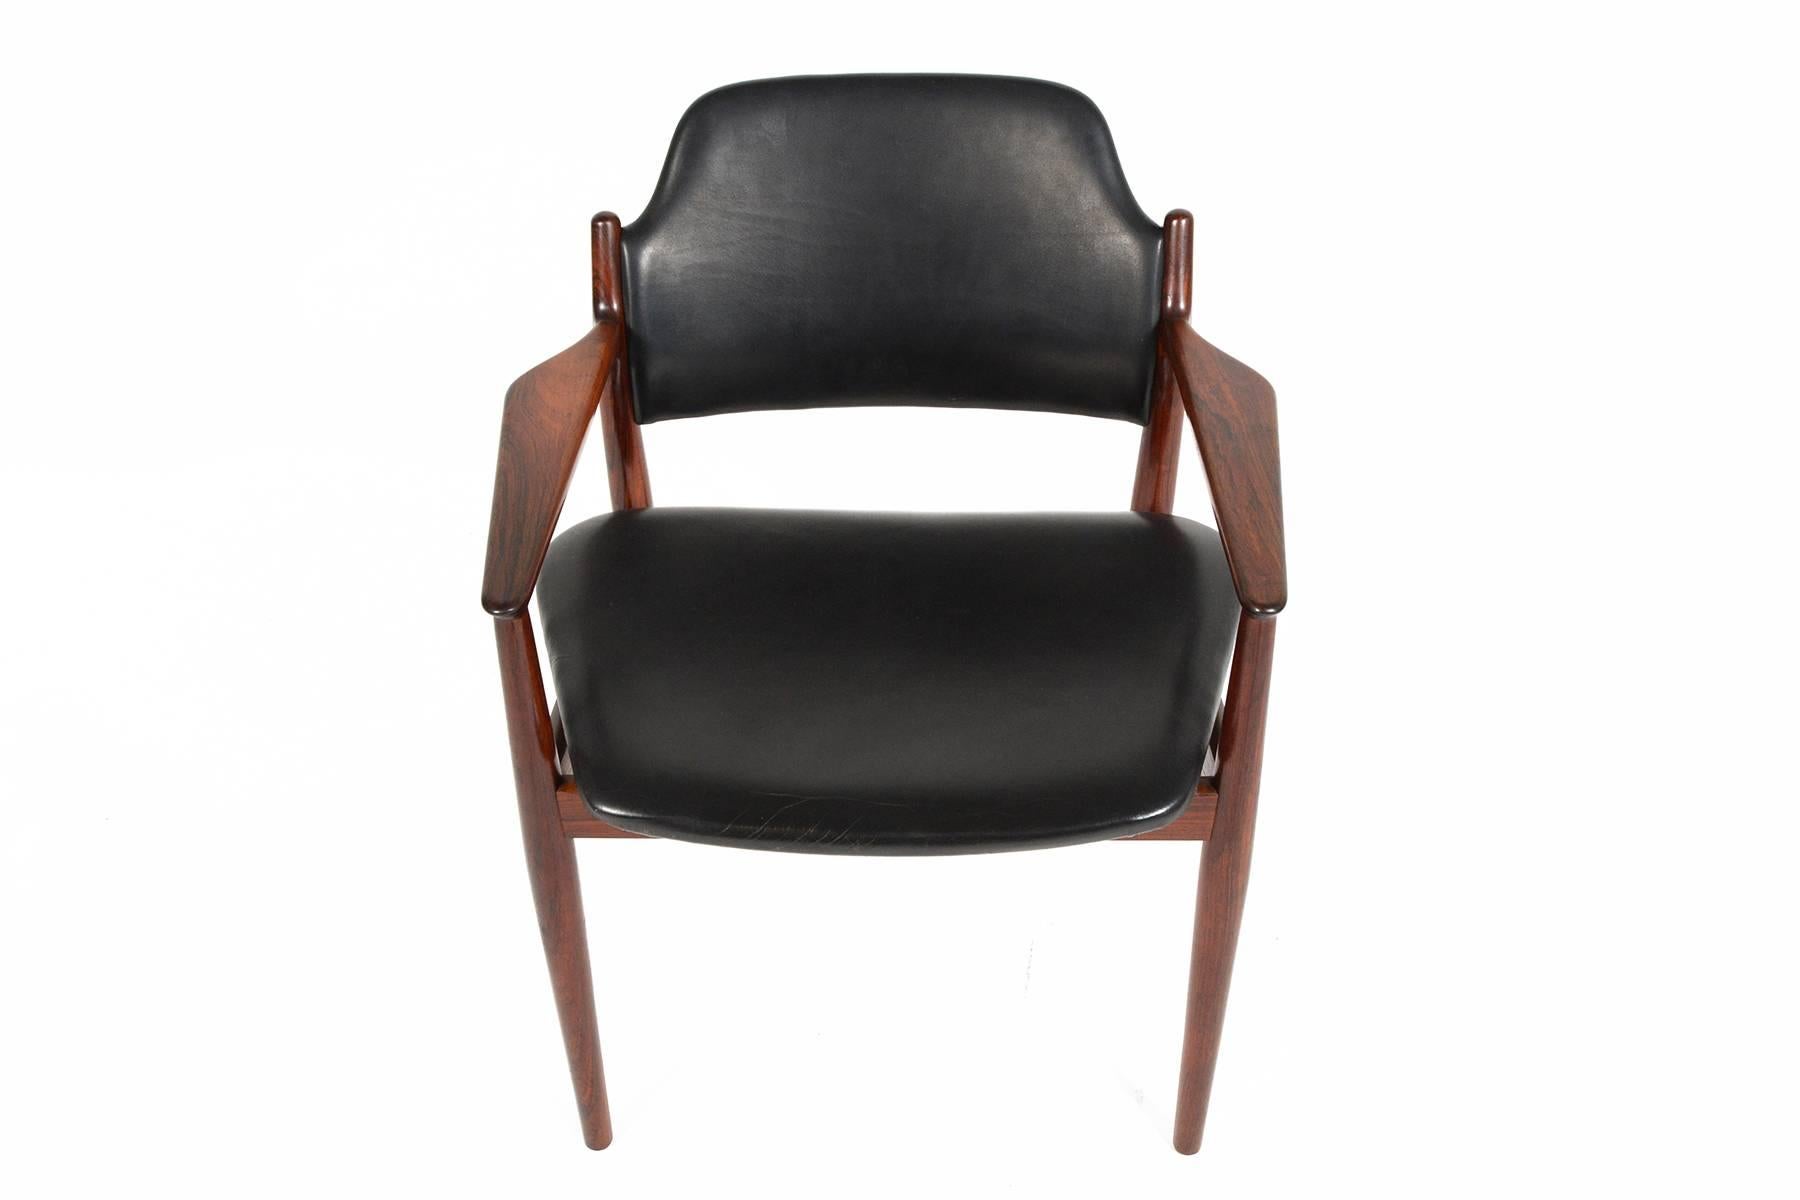 This gorgeous armchair was designed by Arne Vodder for Sibast Møbler in 1961. This model 62A is crafted in beautiful solid Brazilian rosewood and wears its original black leather upholstery. In excellent original condition with typical wear for its